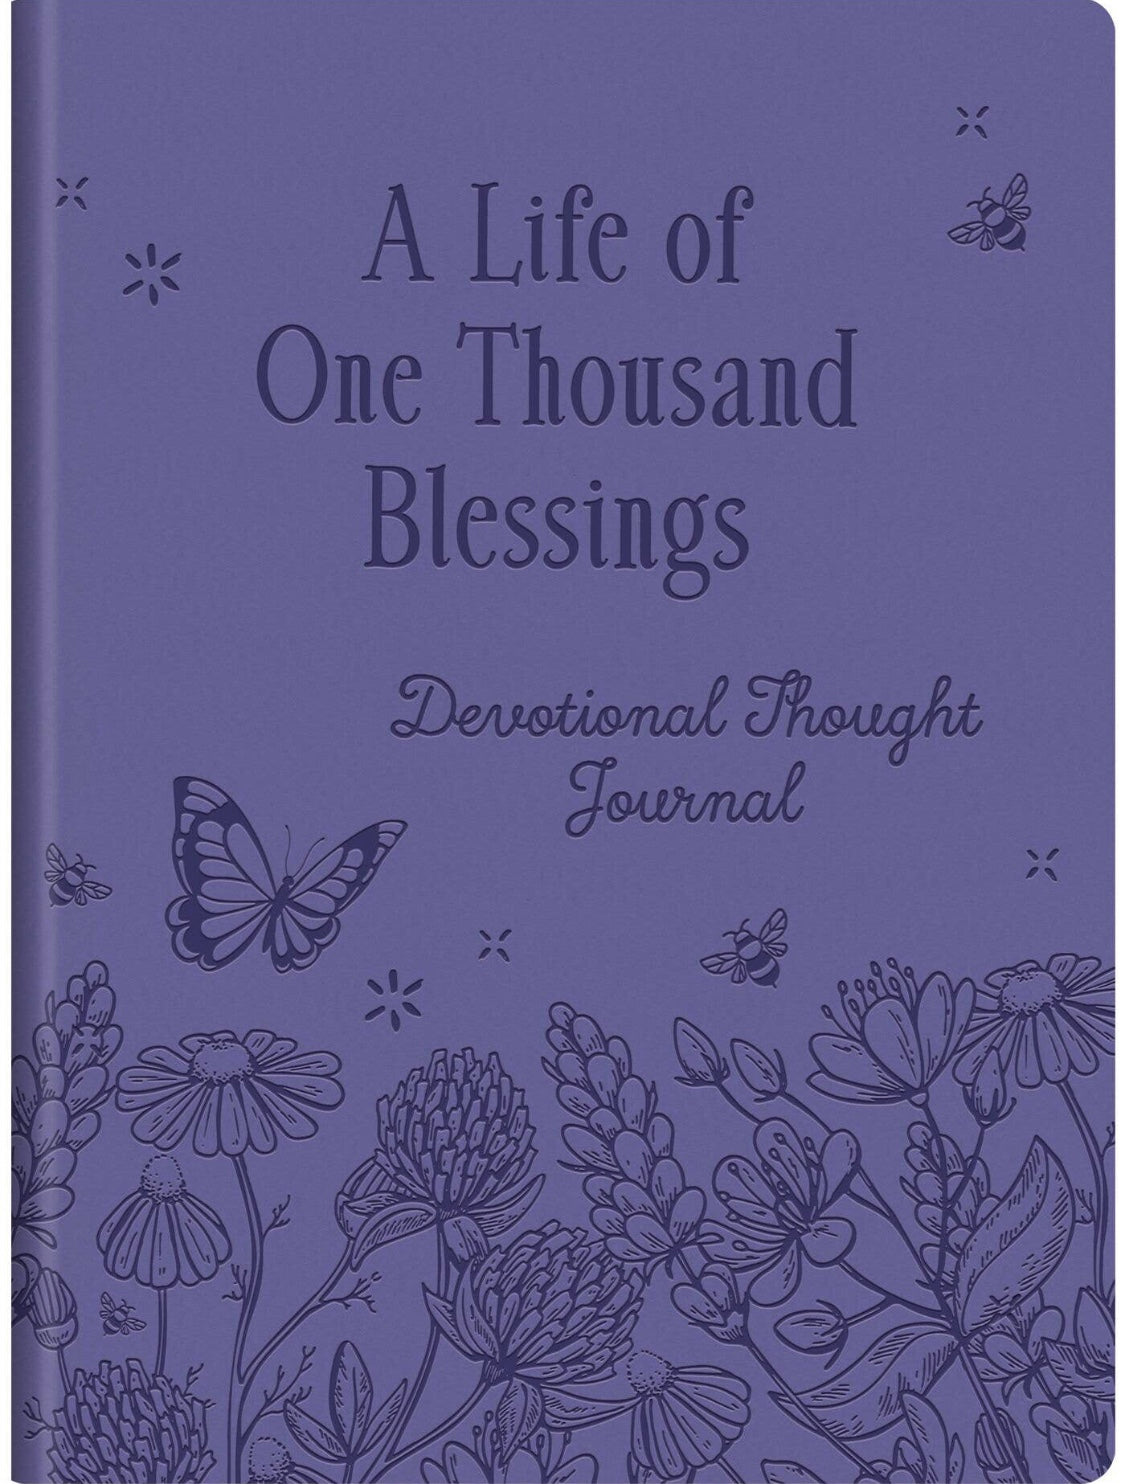 A Life of One Thousand Blessings